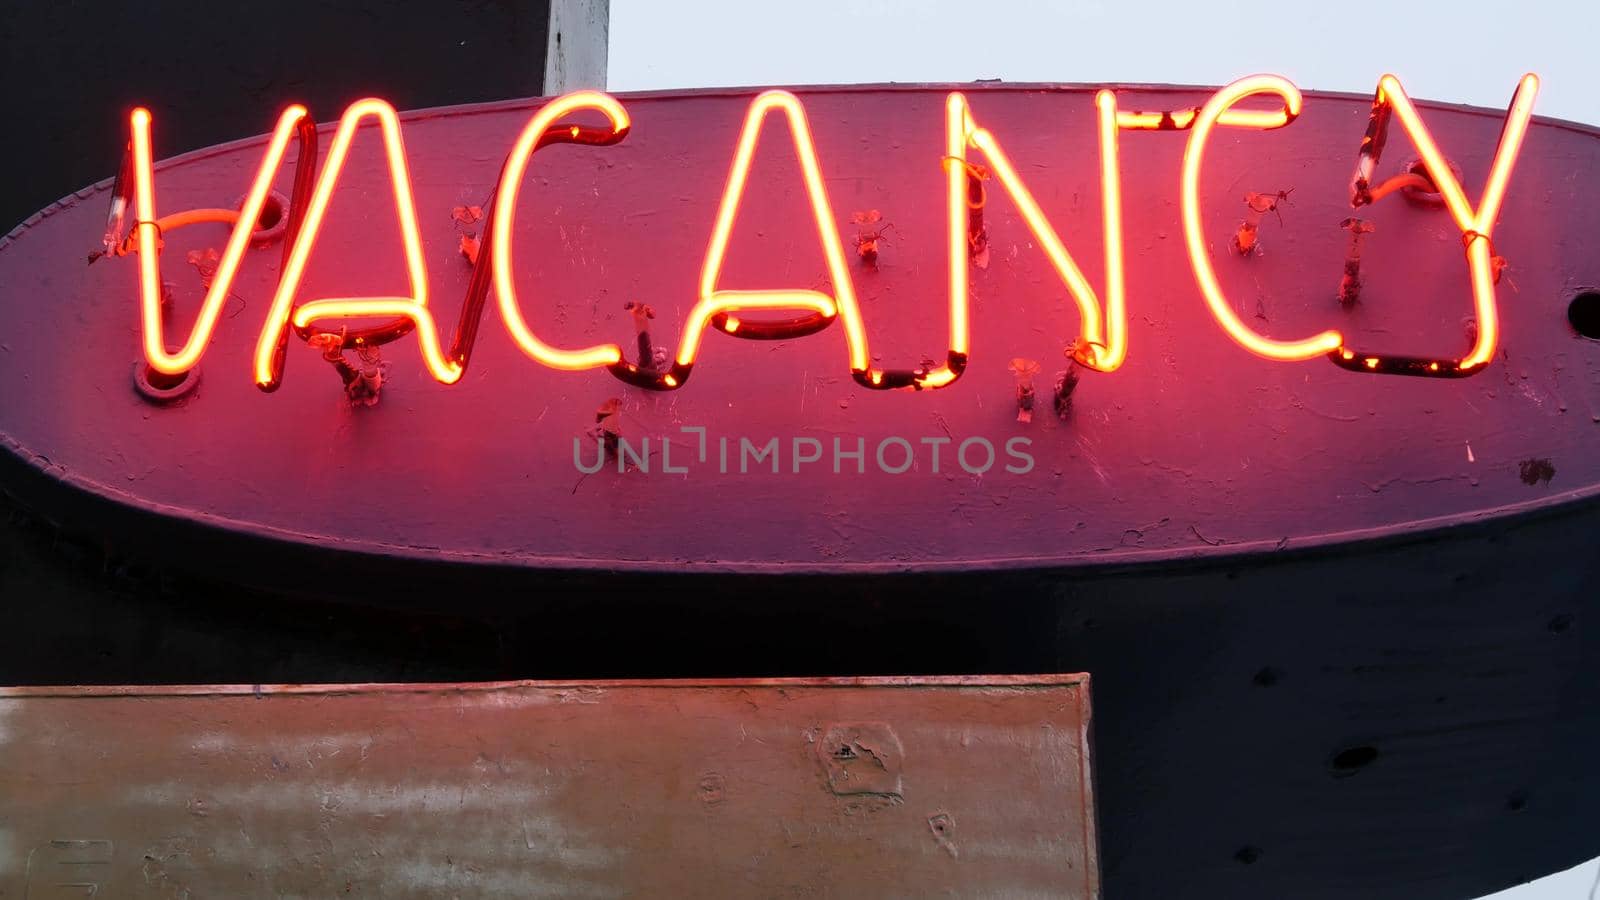 Red neon sign Vacancy glowing, motel or hotel, California USA. Illuminated text. by DogoraSun